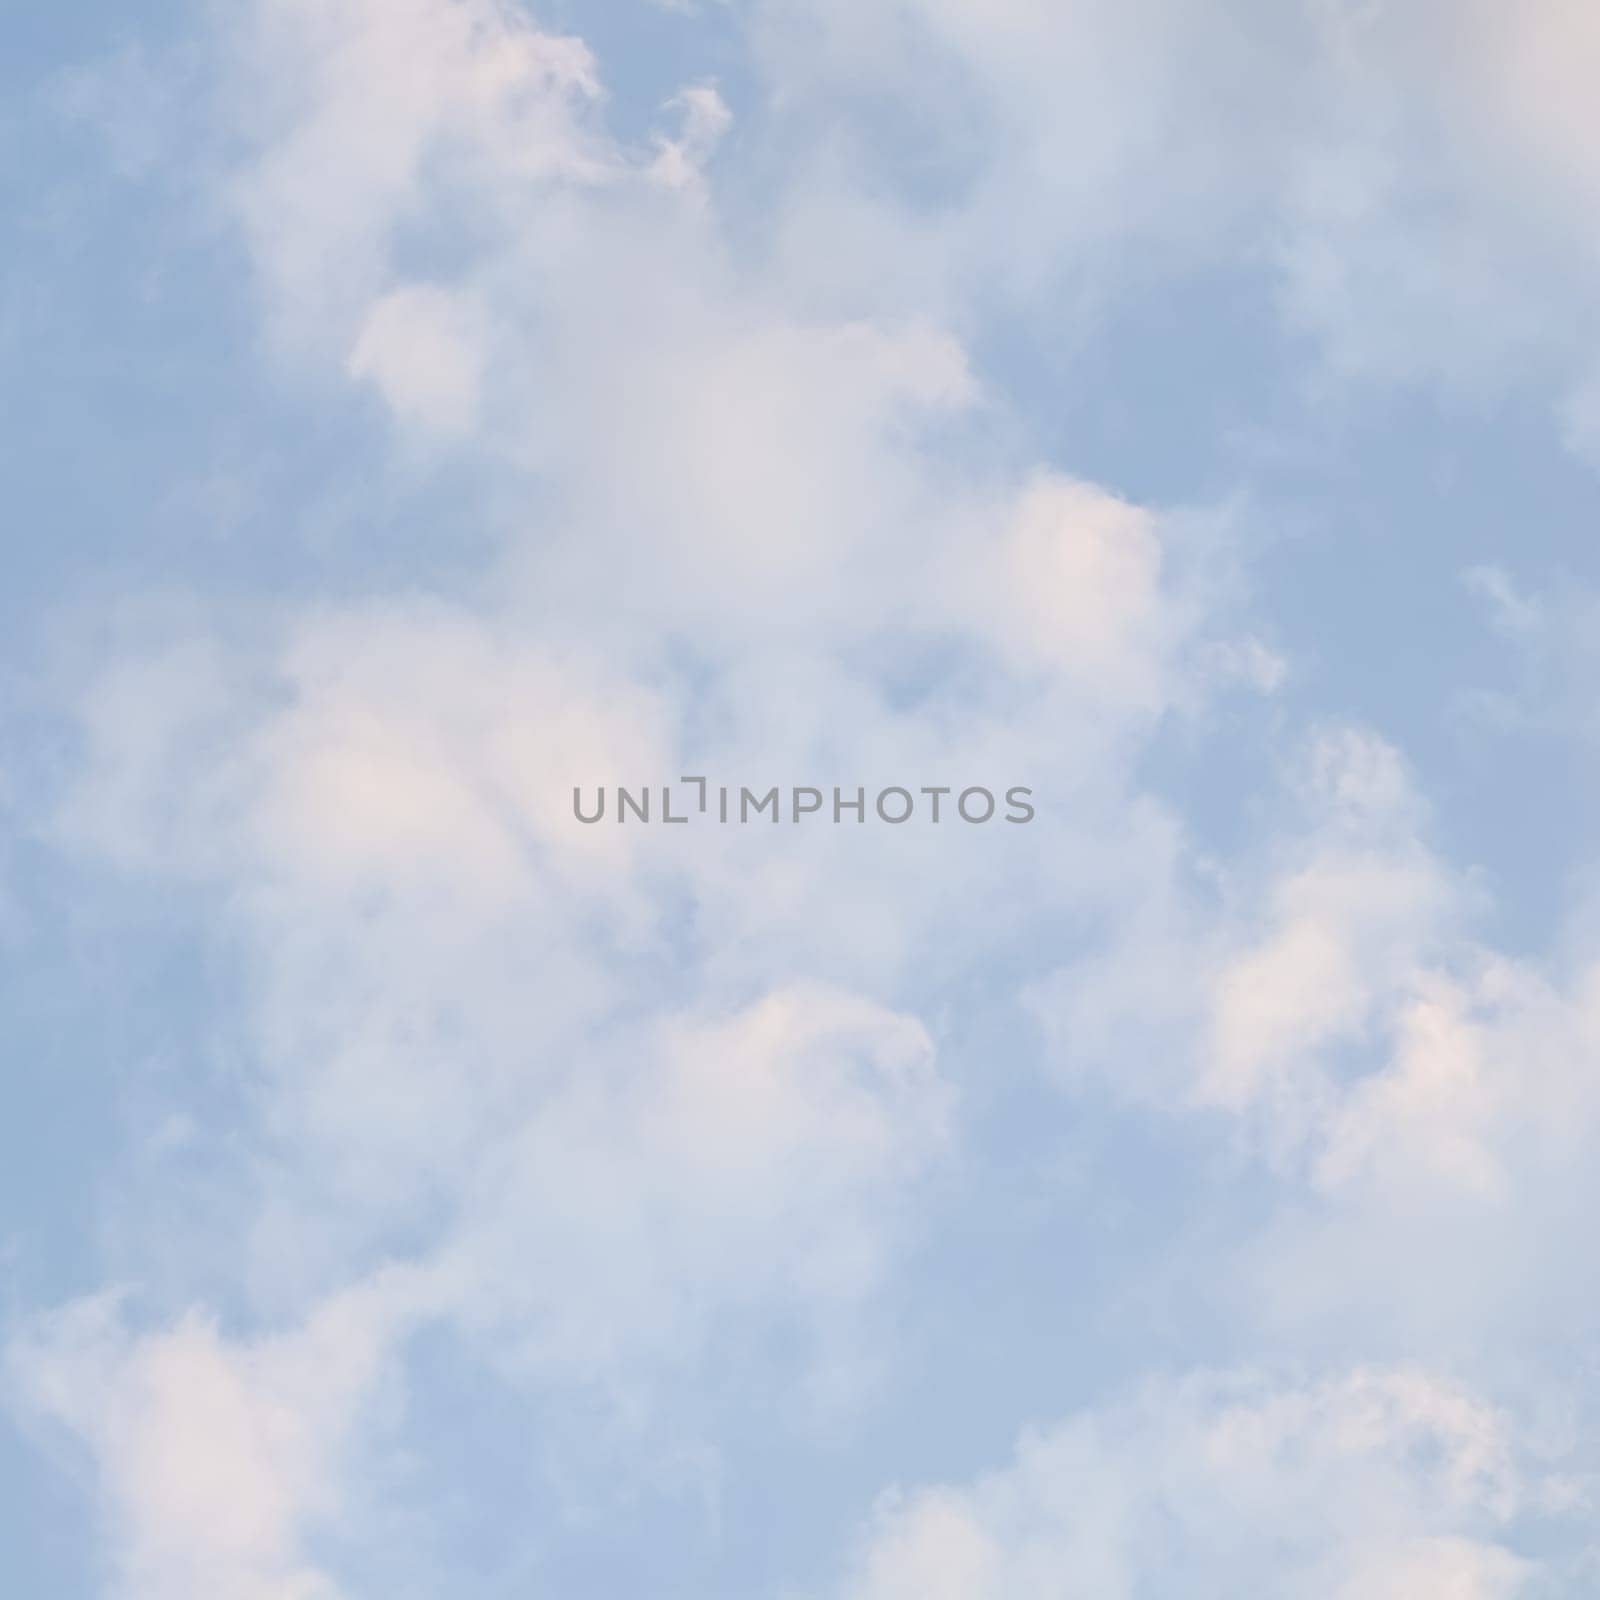 Background of blue sky with white clouds by Olayola